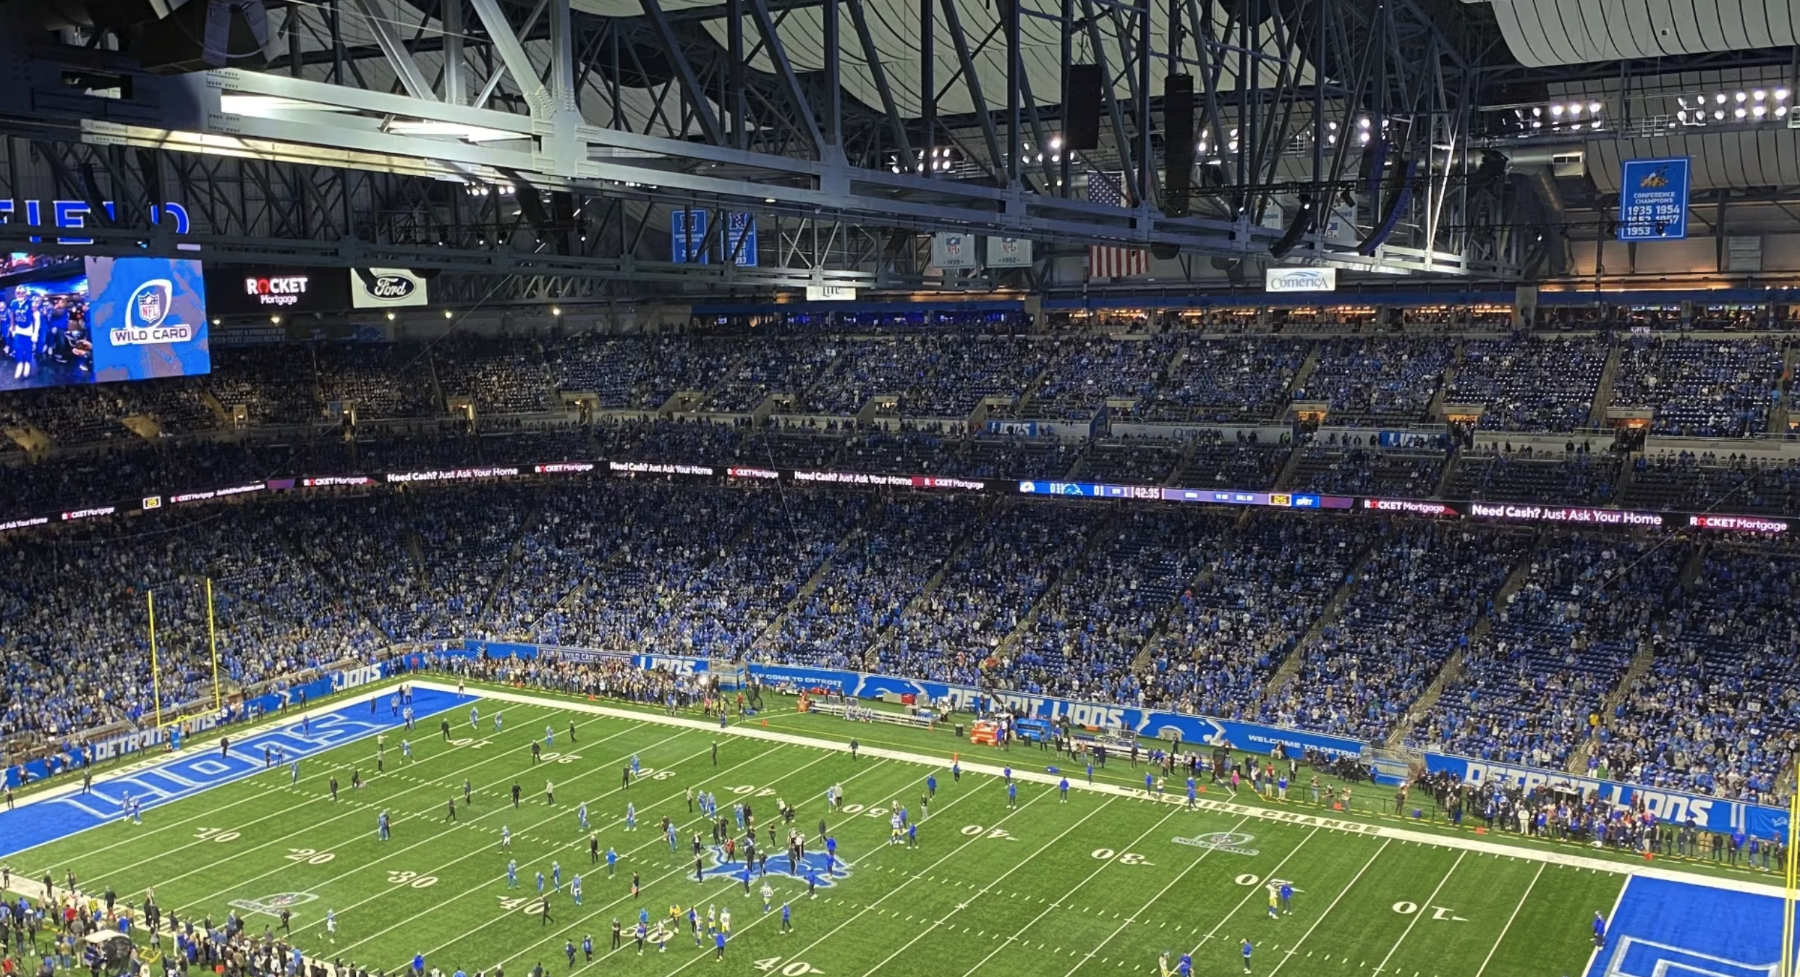 Interior image of Detroit Lions playing at Ford Field Stadium